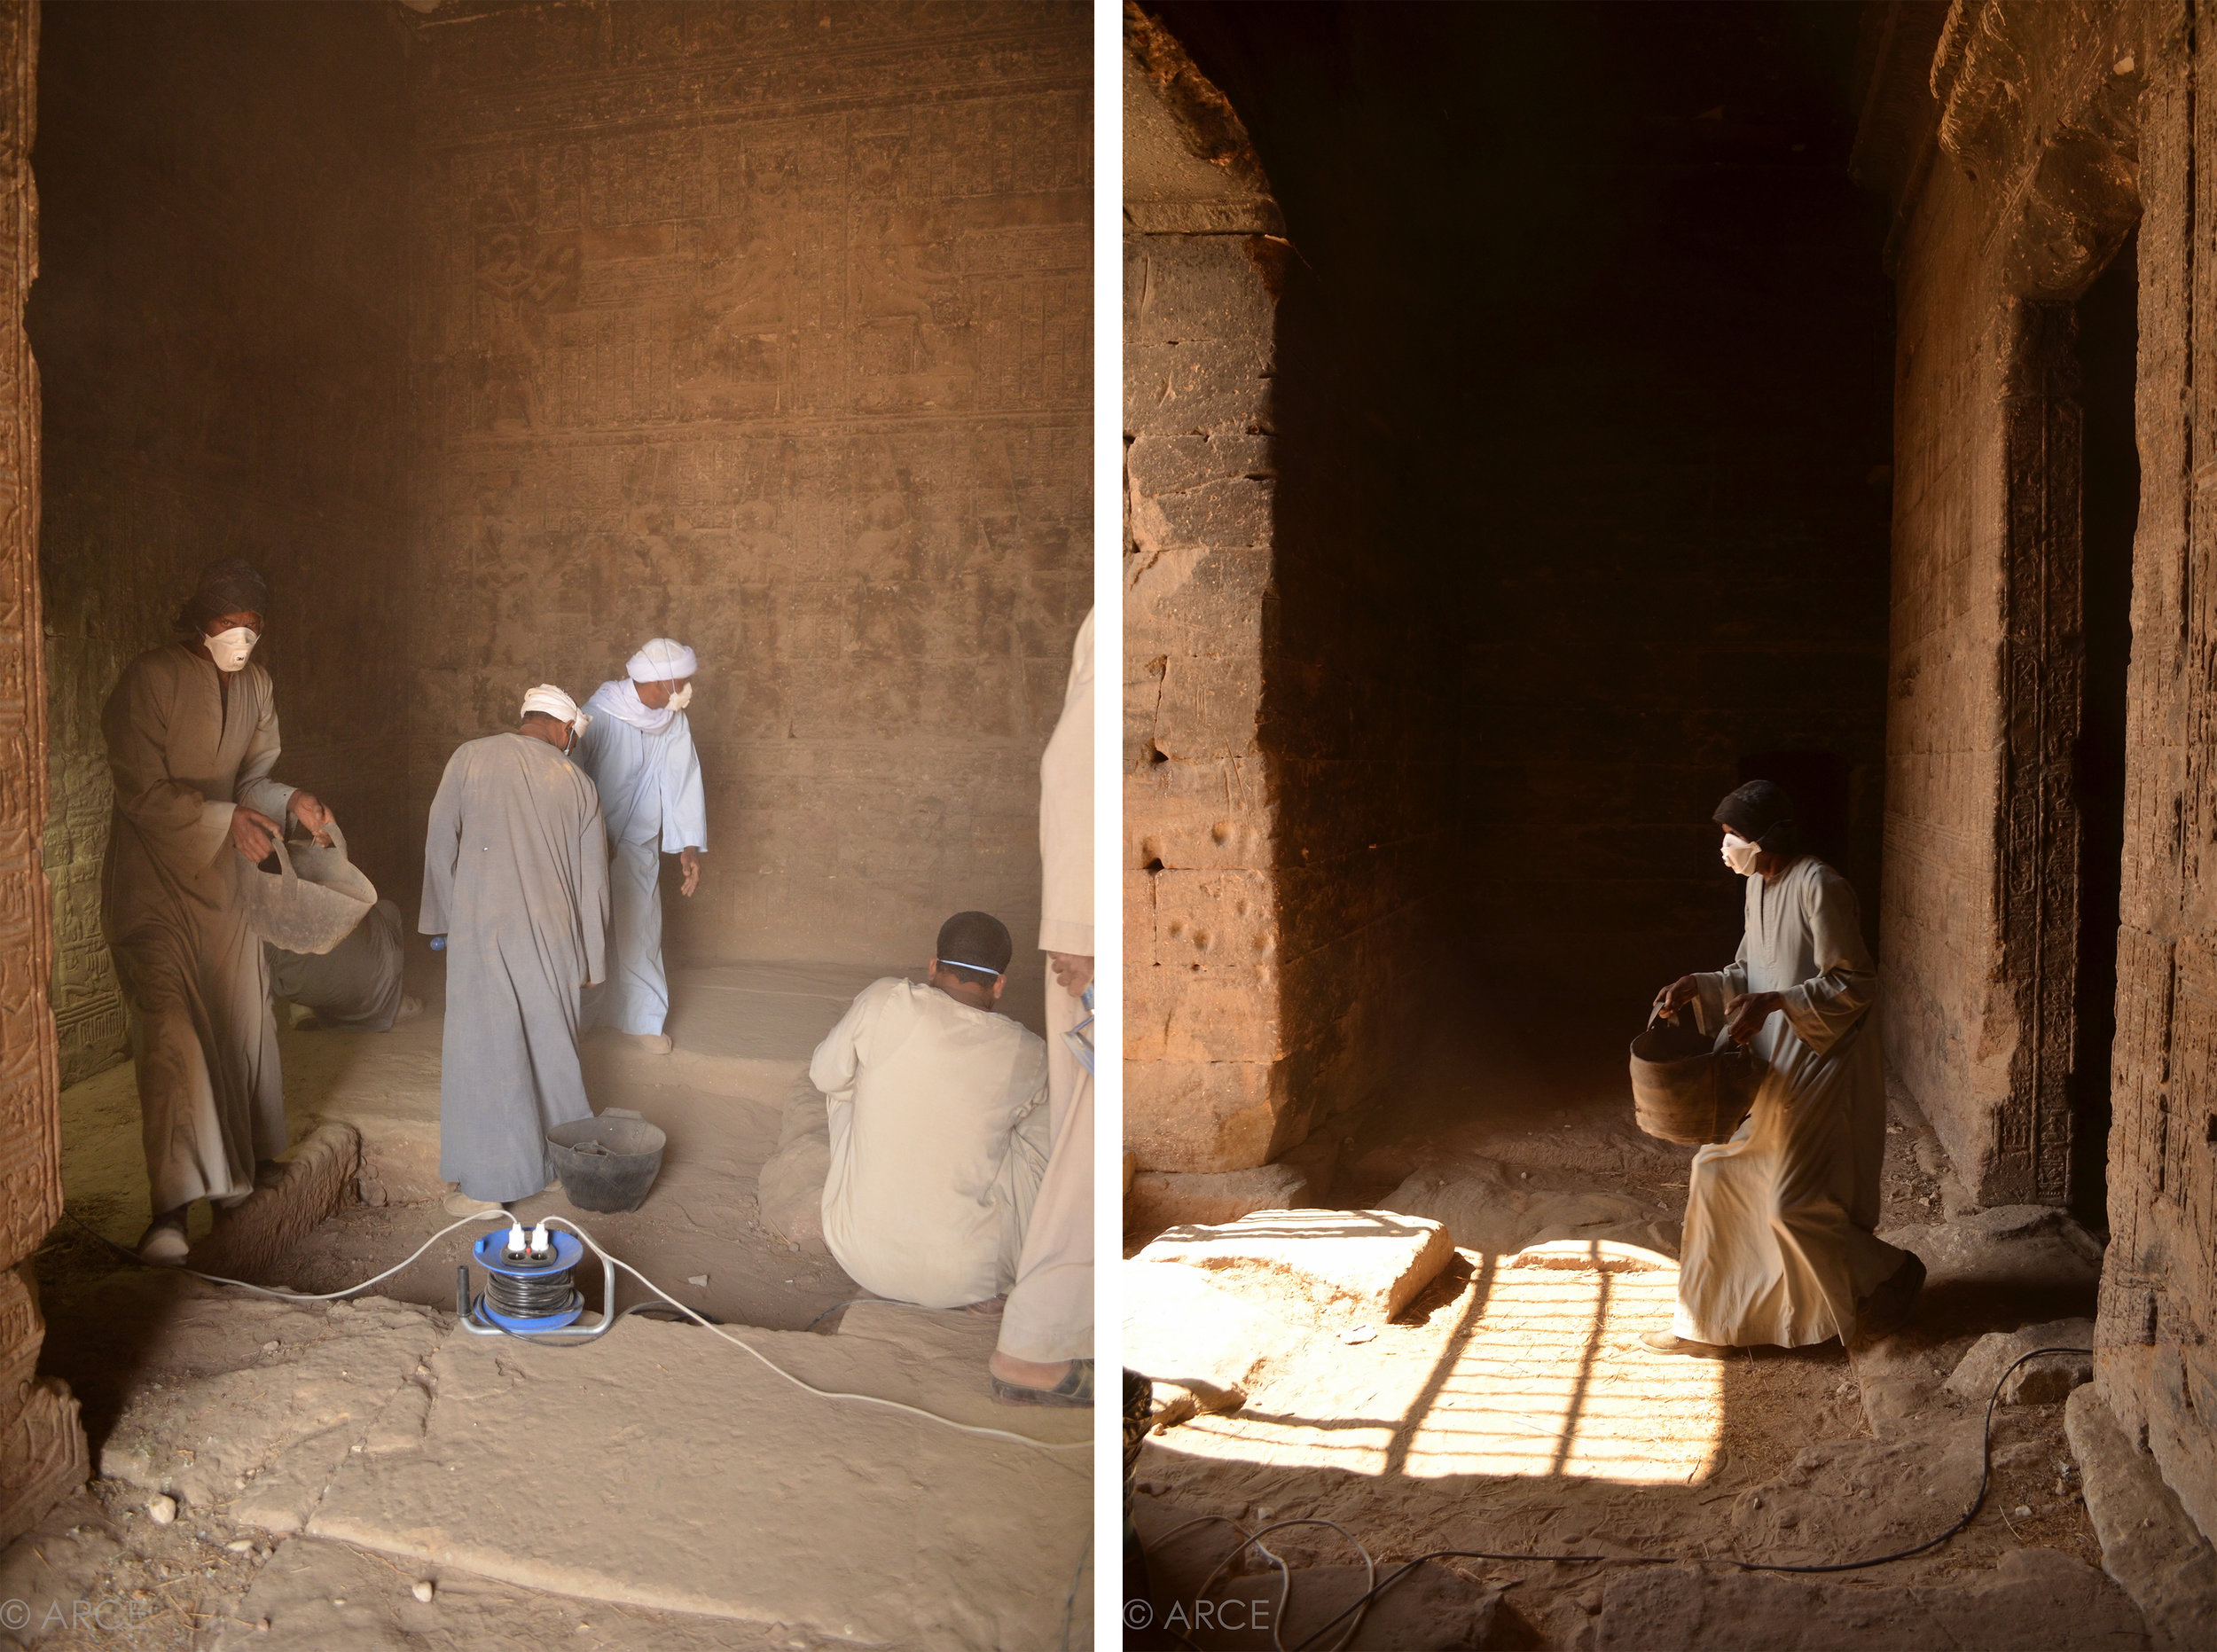  Removal of thick dust and guano deposits from the ﬂoor of the temple. Dust movement was kept to a minimum by collection with trowels rather than brooms and was regular removal from the temple as it accumulated.&nbsp;  Image © ARCE, 2012 